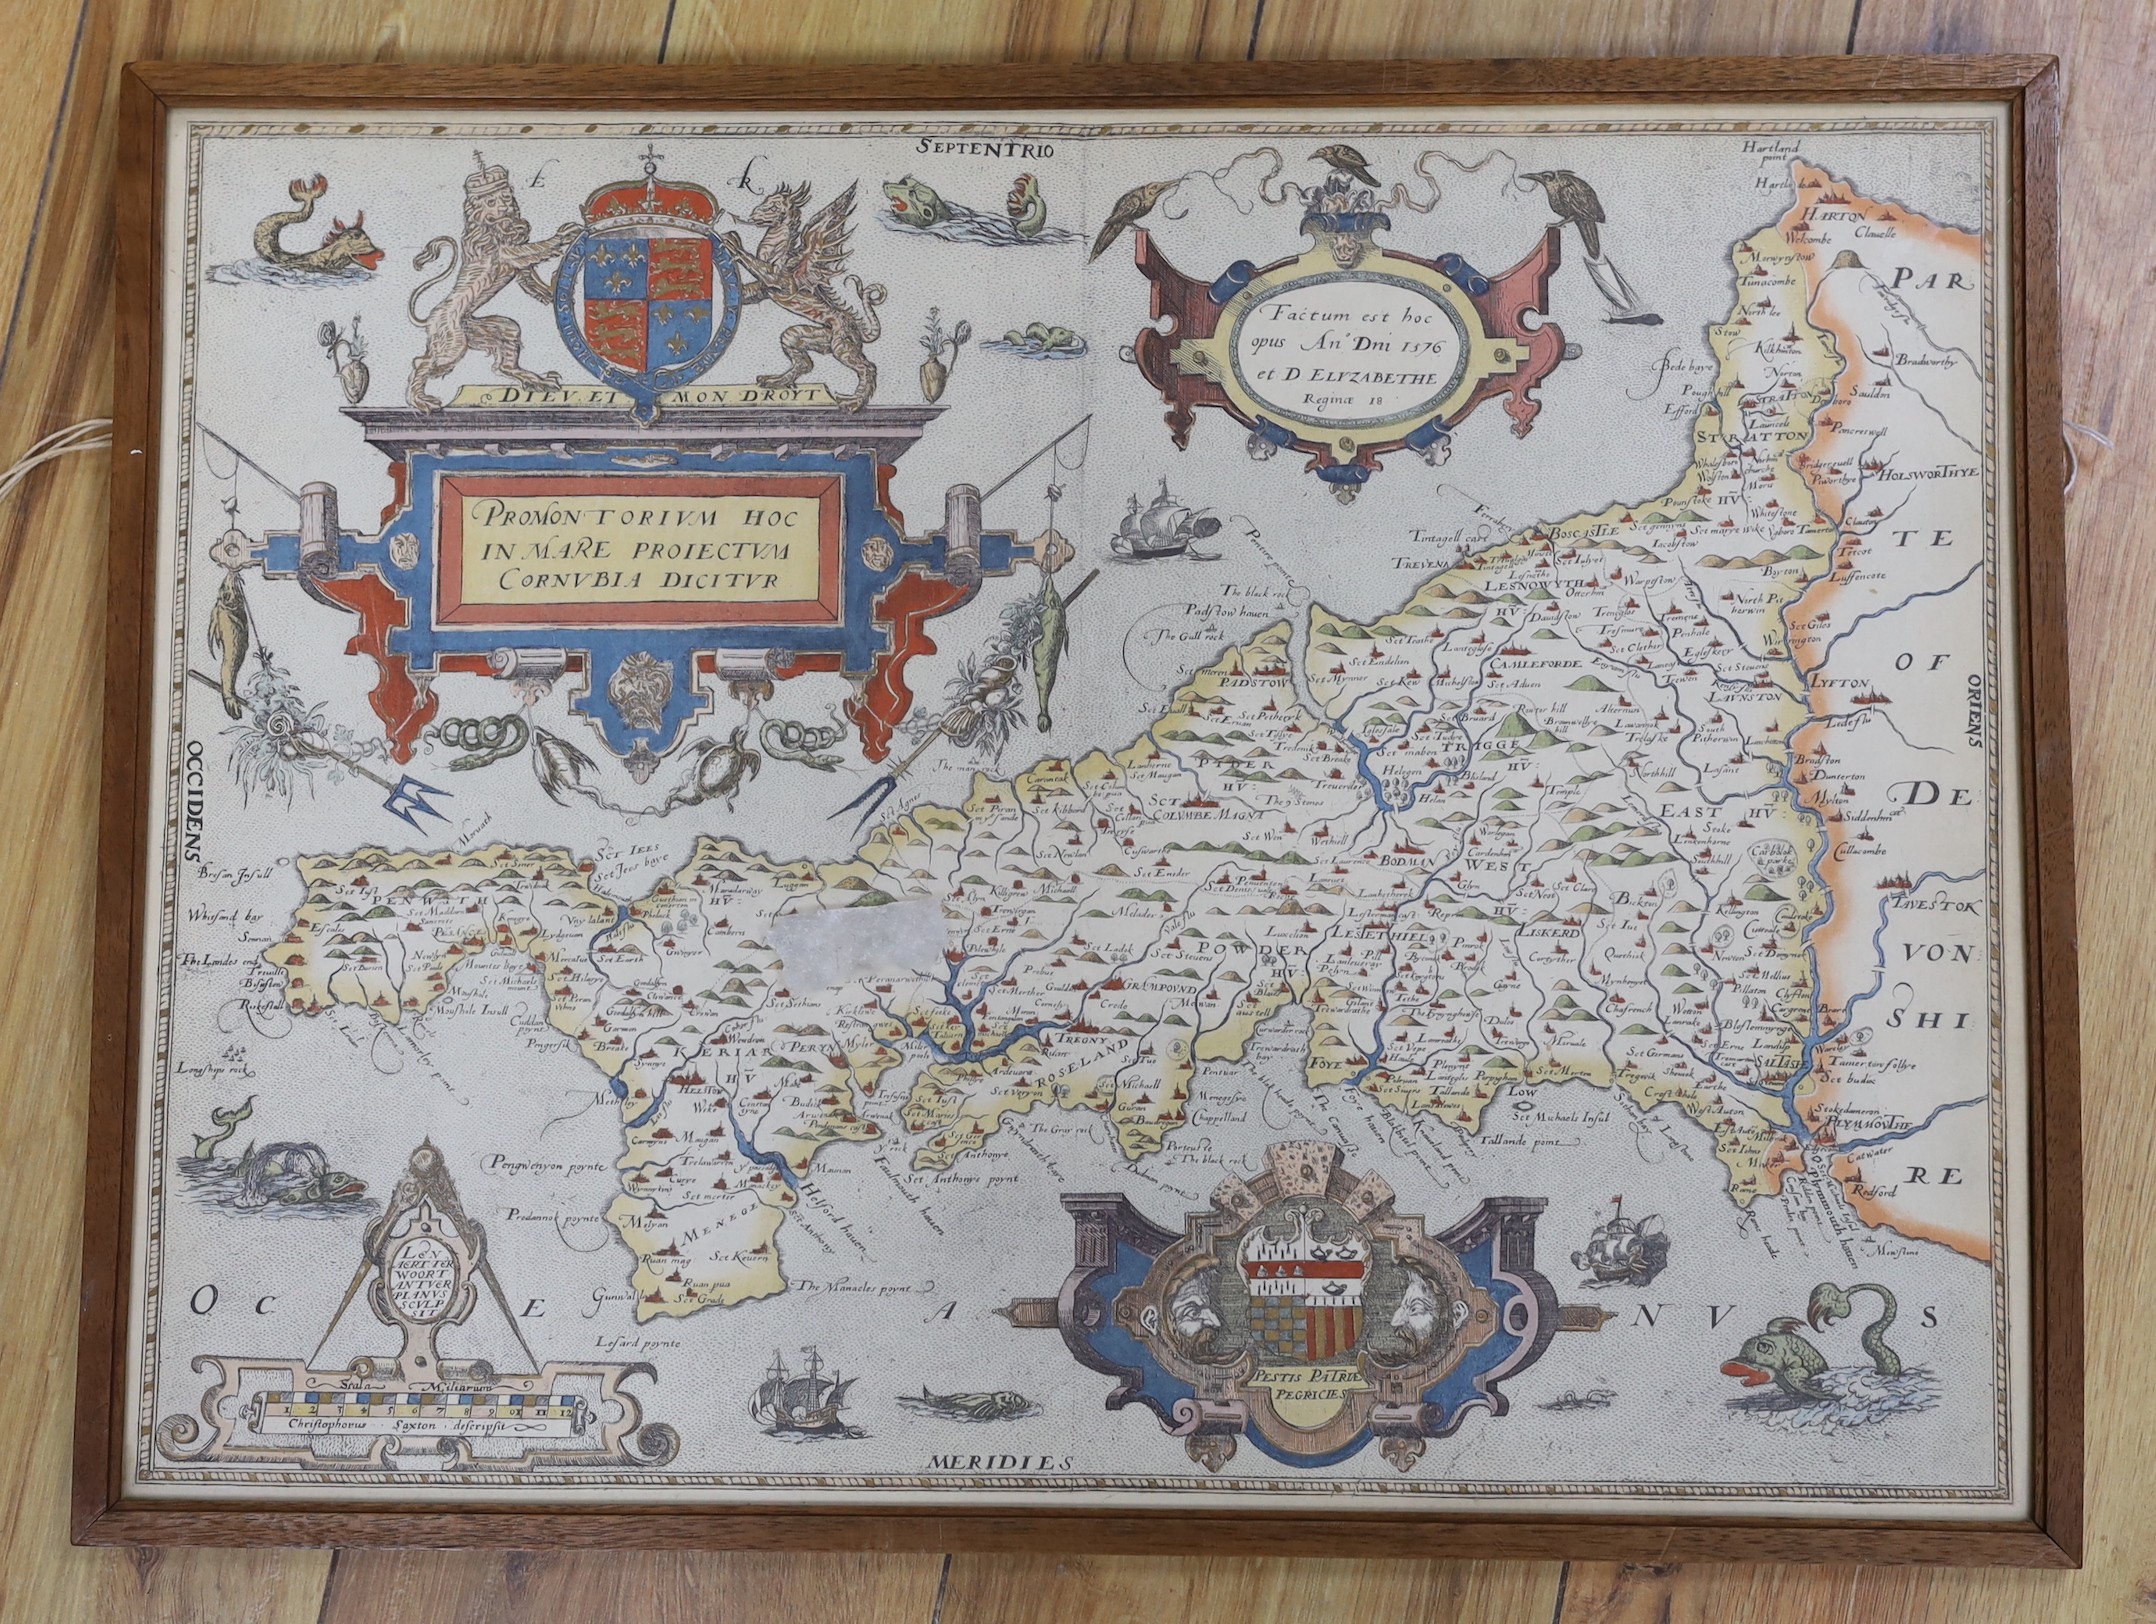 Kip after Saxton, coloured reprint, Map of Cornwall 1576, 37 x 50cm